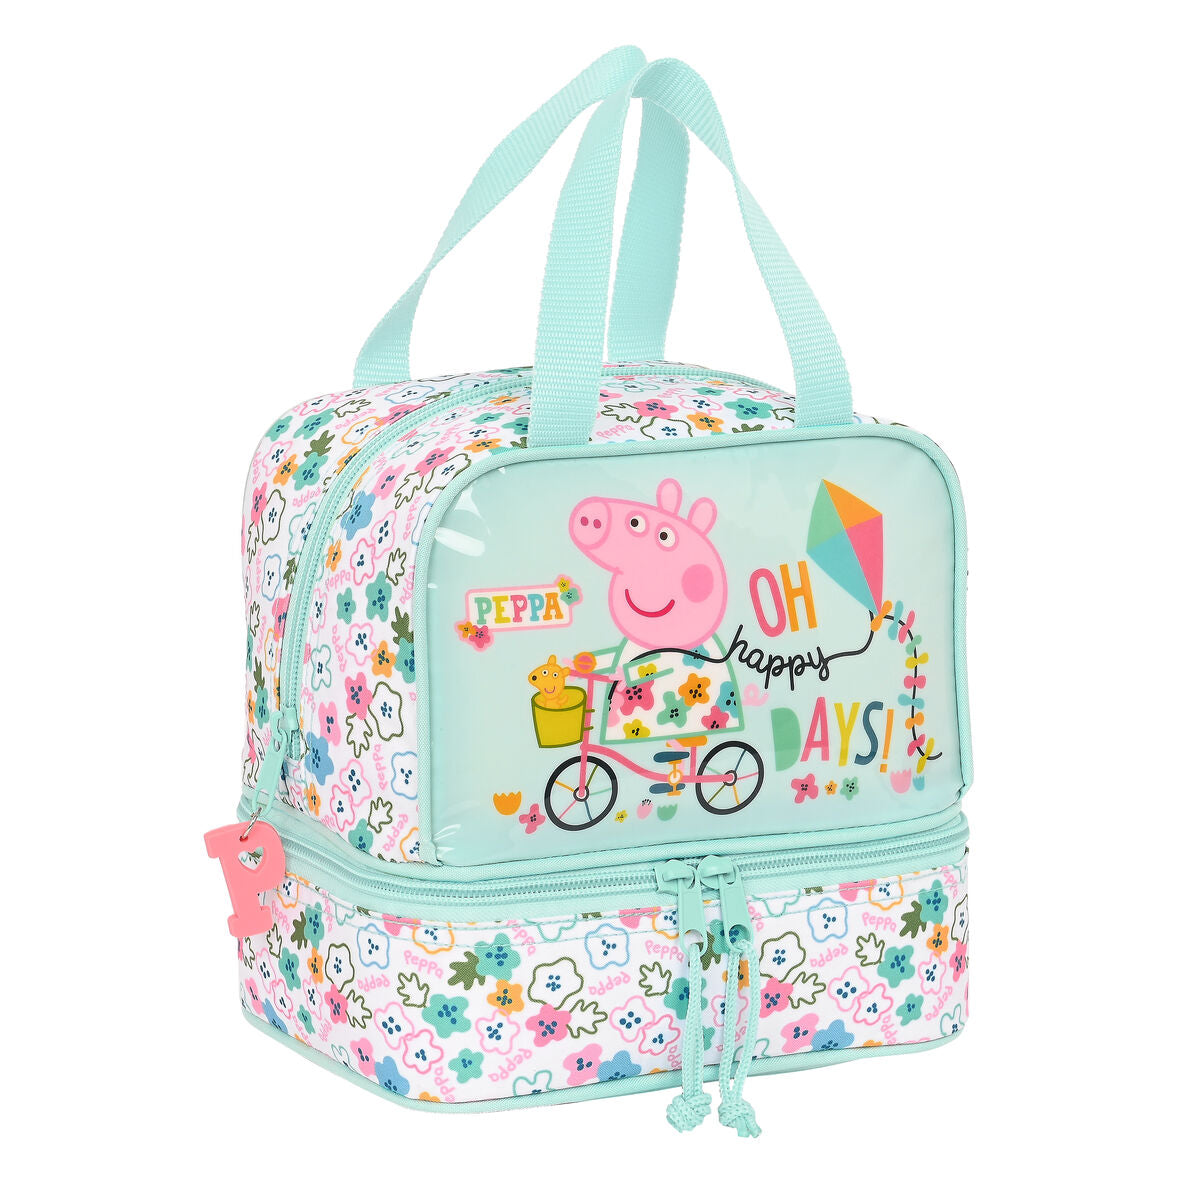 Peppa the Pig lunch box ,lunch tote ,kids girls peppa the pig